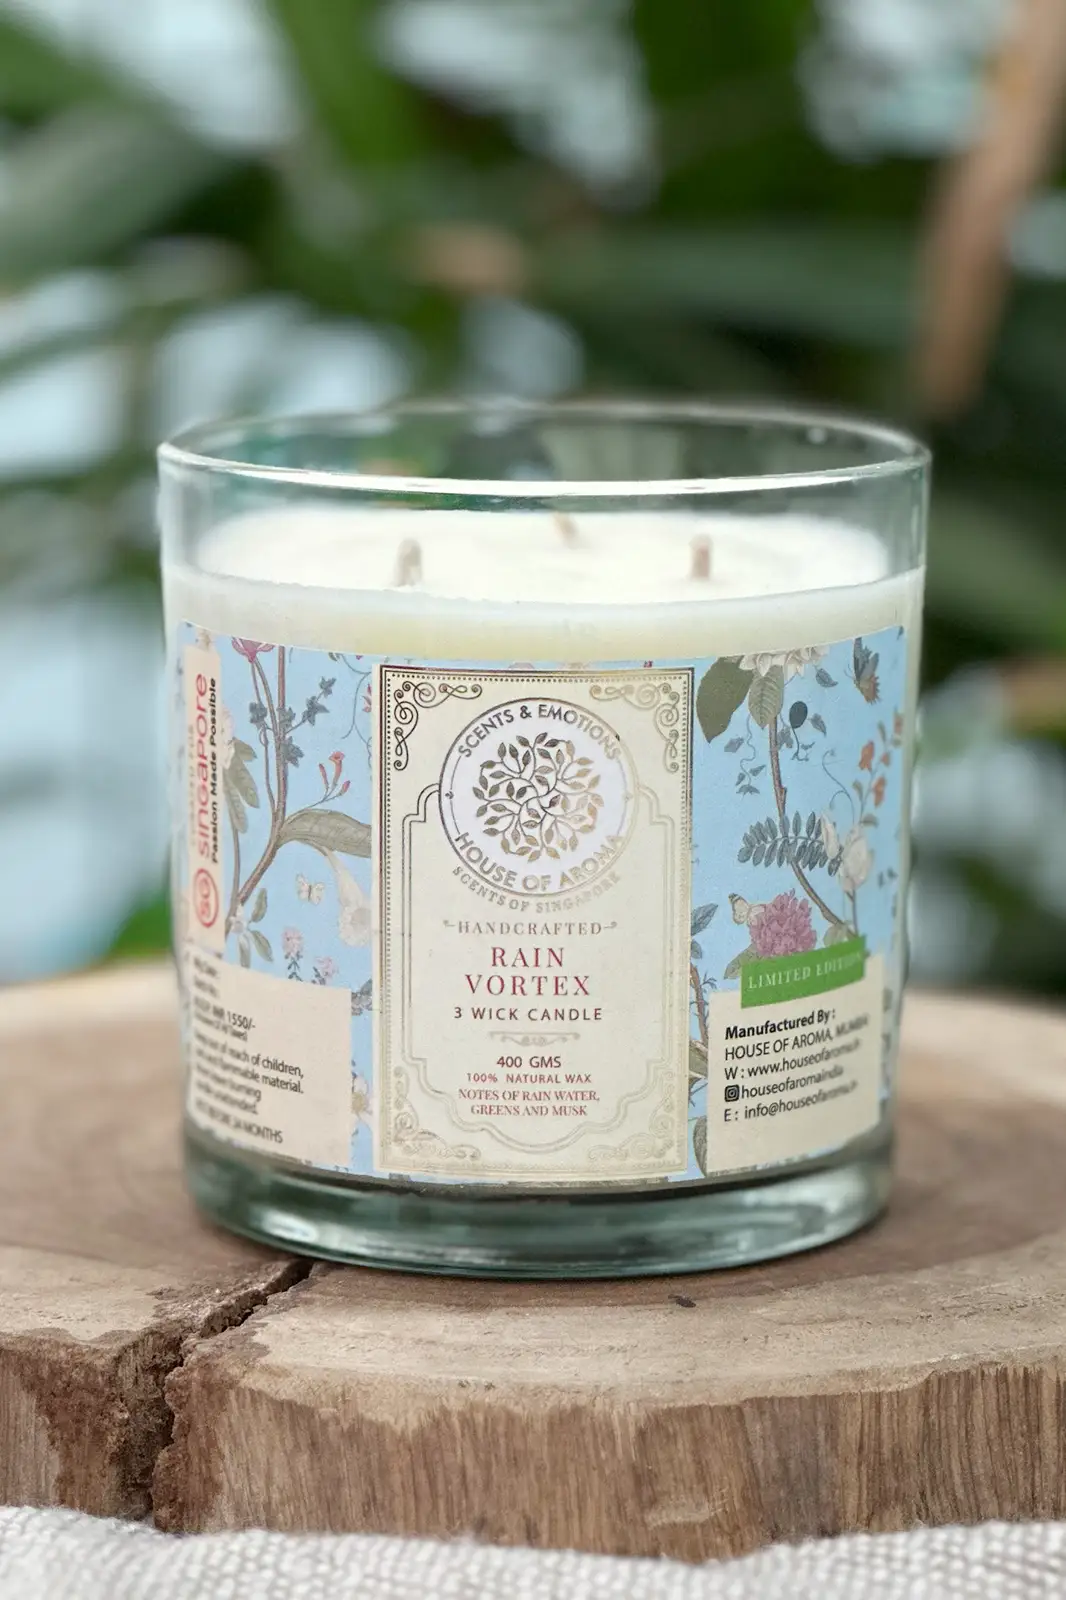 Natural wax rain vortex 3 wick candle, rain vortex, 3 wick candle, wax candle, soy wax candle, online scented candles, 3 wick soy wax candles, wax candles, large candles, long lasting candles, relaxing candle fragrance, decorative candles, best 3 wick candles, 3 wick candle jars, House of Aroma